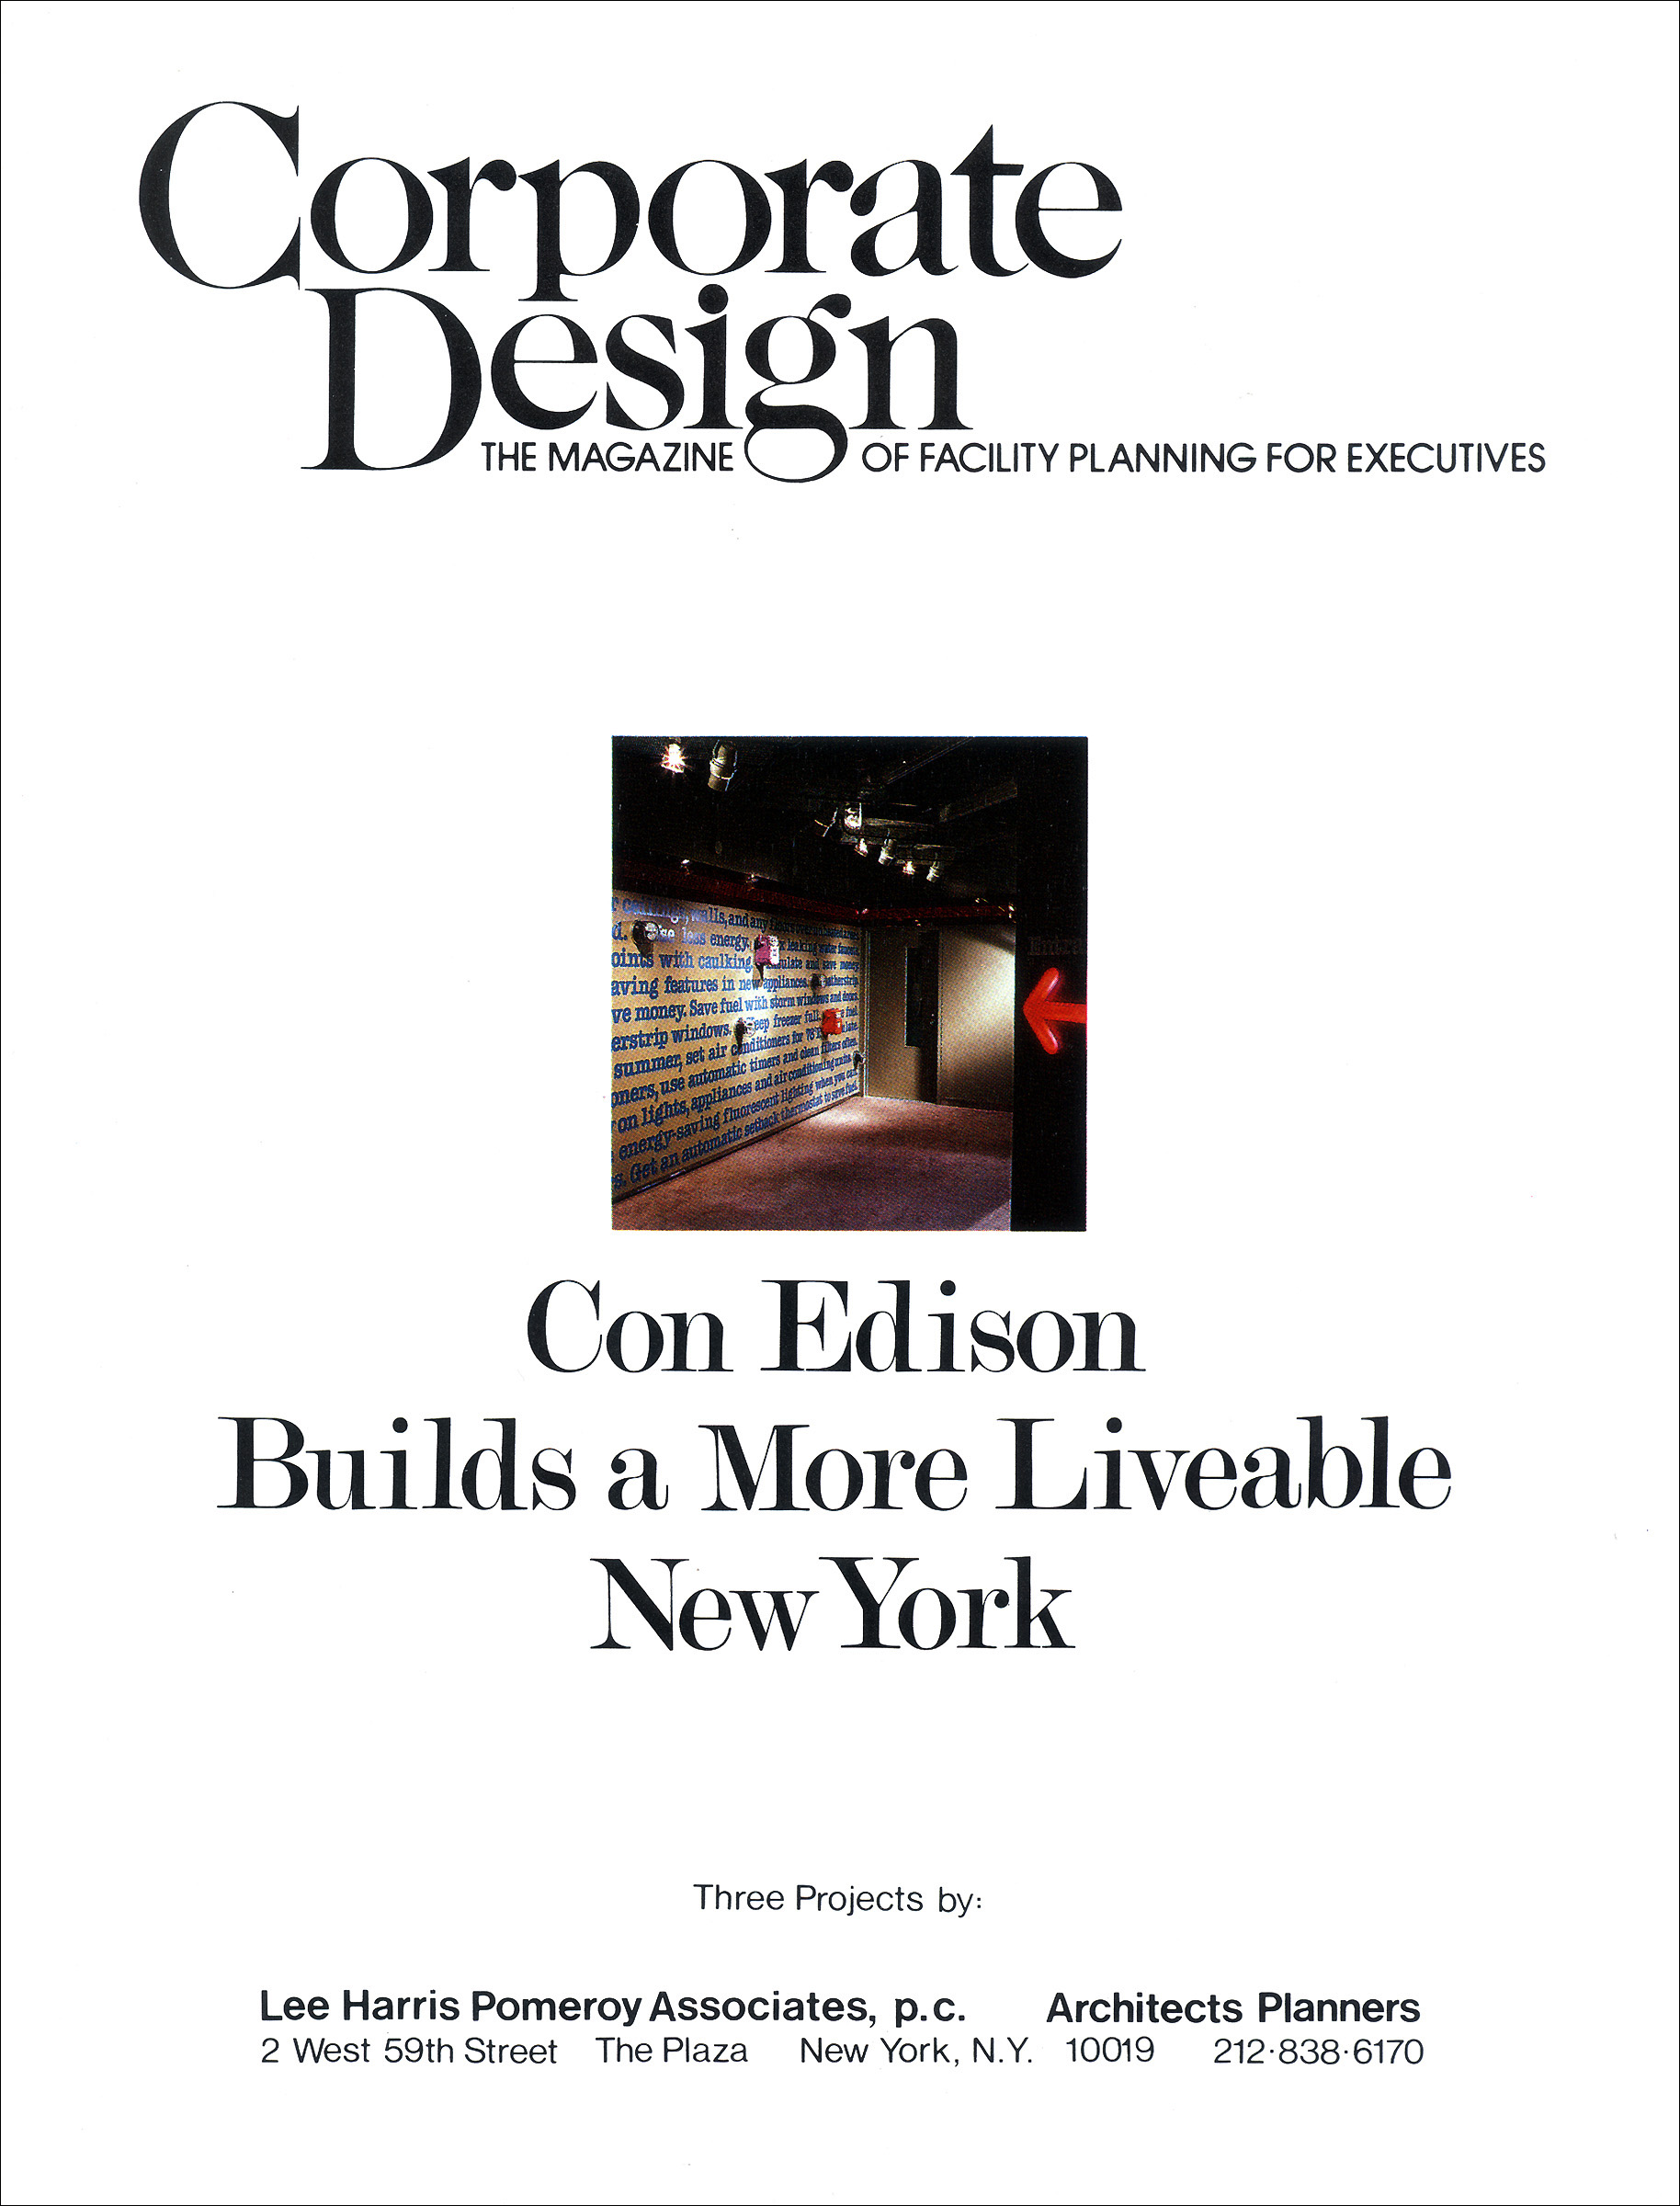 Con Edison Builds a More Liveable New York